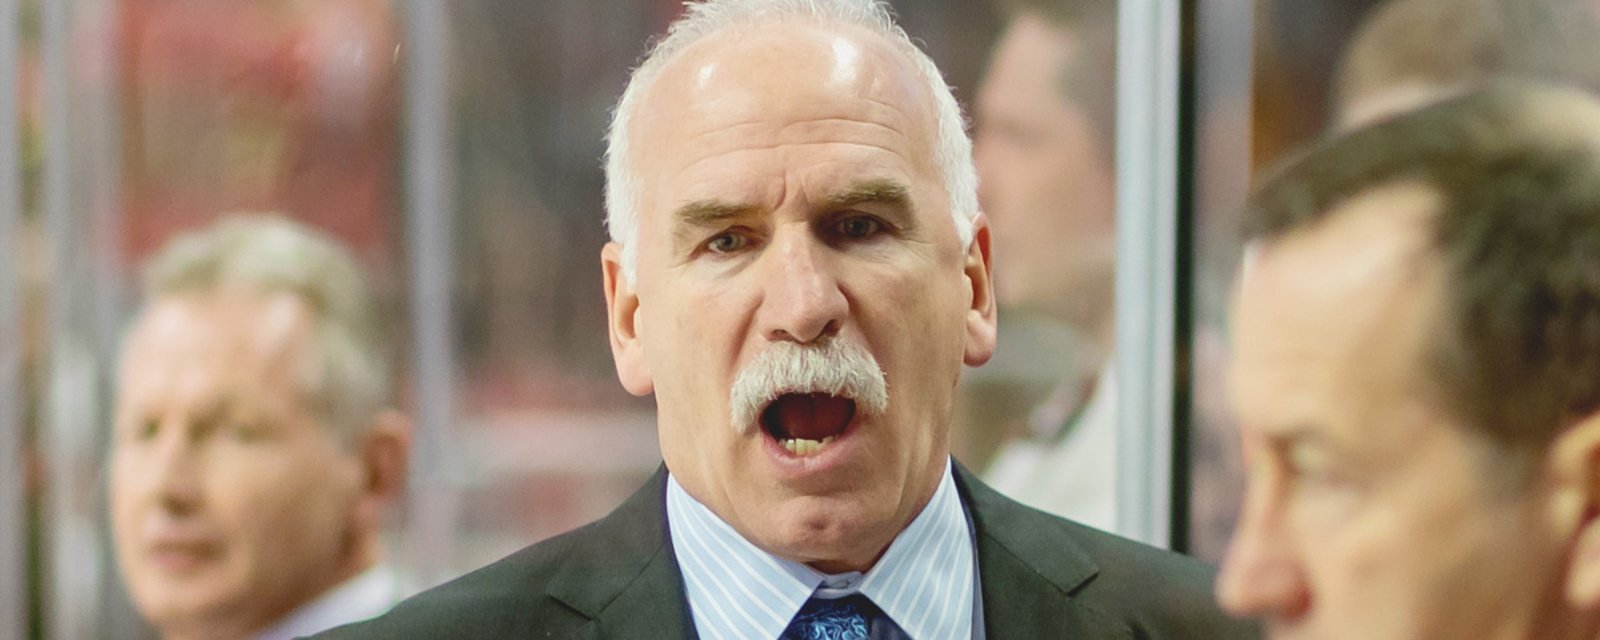 Breaking New : Julien's situation has an impact on coach Q.